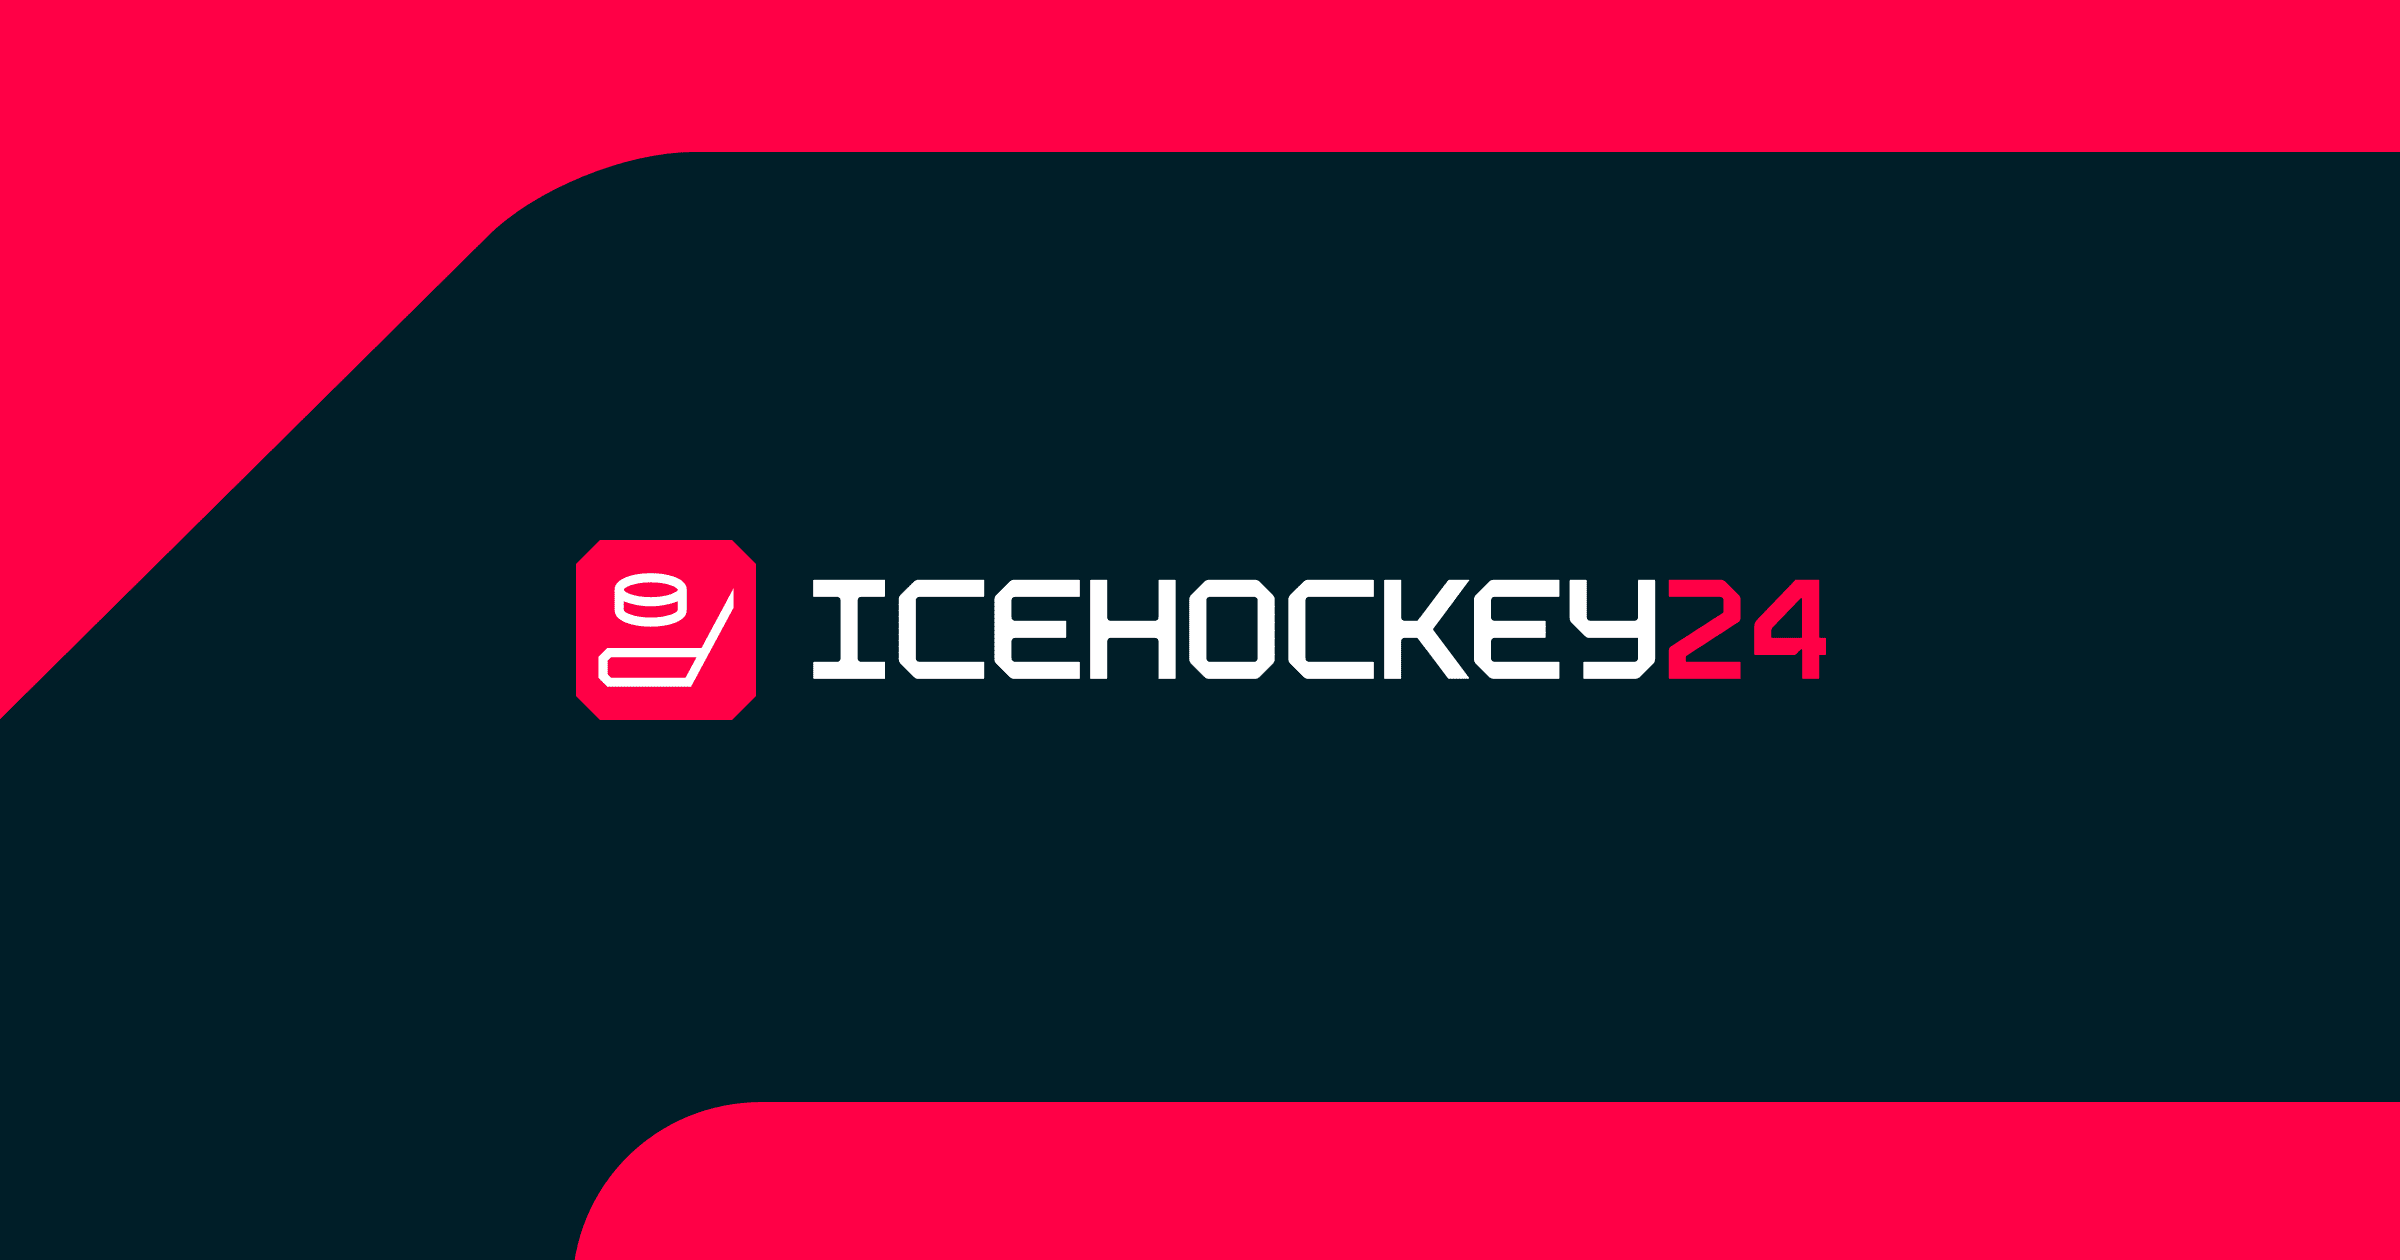 IceHockey24 Live Hockey Scores, Results, Standings